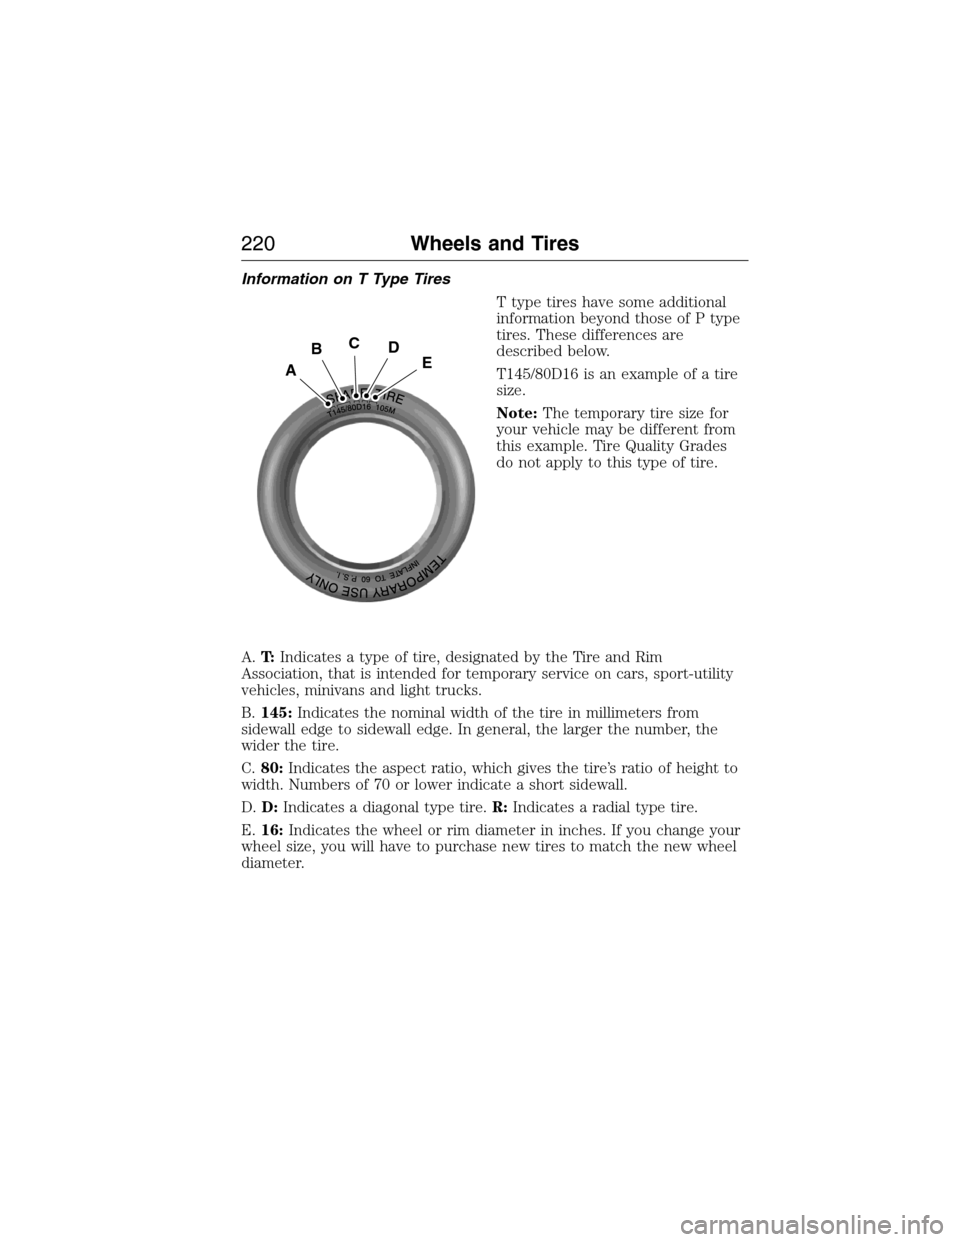 FORD E SERIES 2015 4.G Owners Manual Information on T Type Tires
T type tires have some additional
information beyond those of P type
tires. These differences are
described below.
T145/80D16 is an example of a tire
size.
Note:The tempora